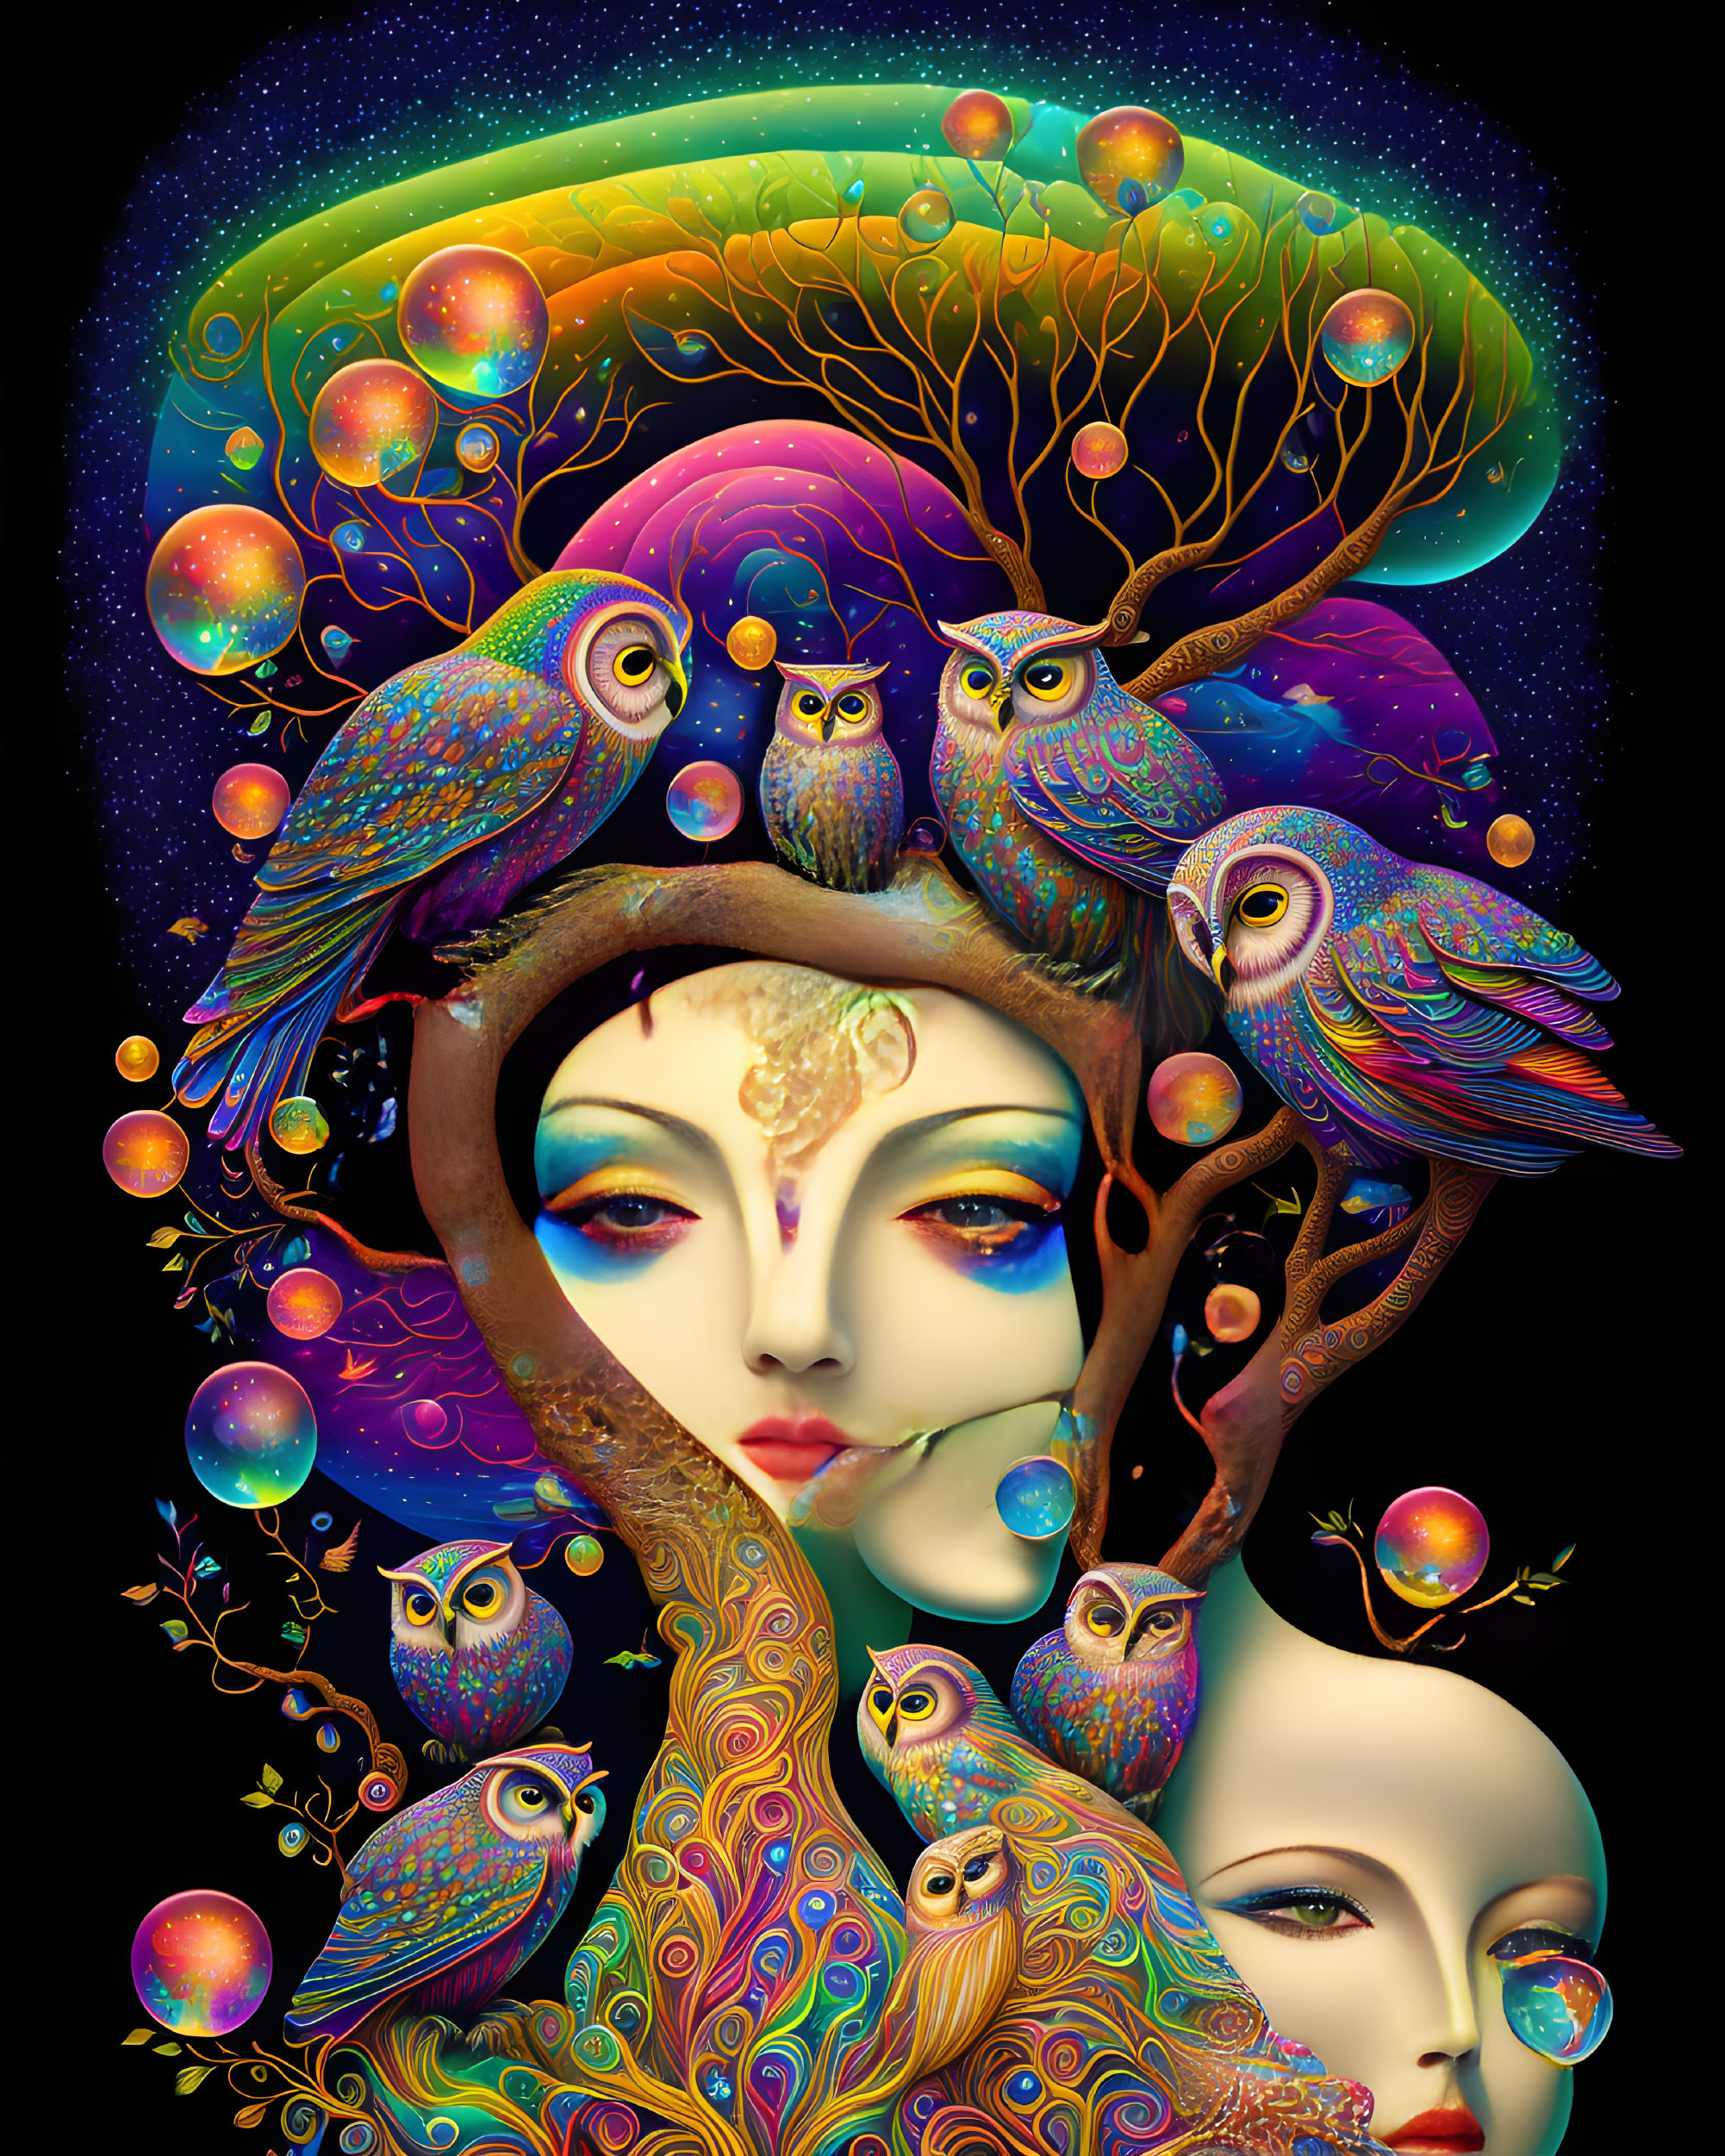 Psychedelic owl family in woman’s hair